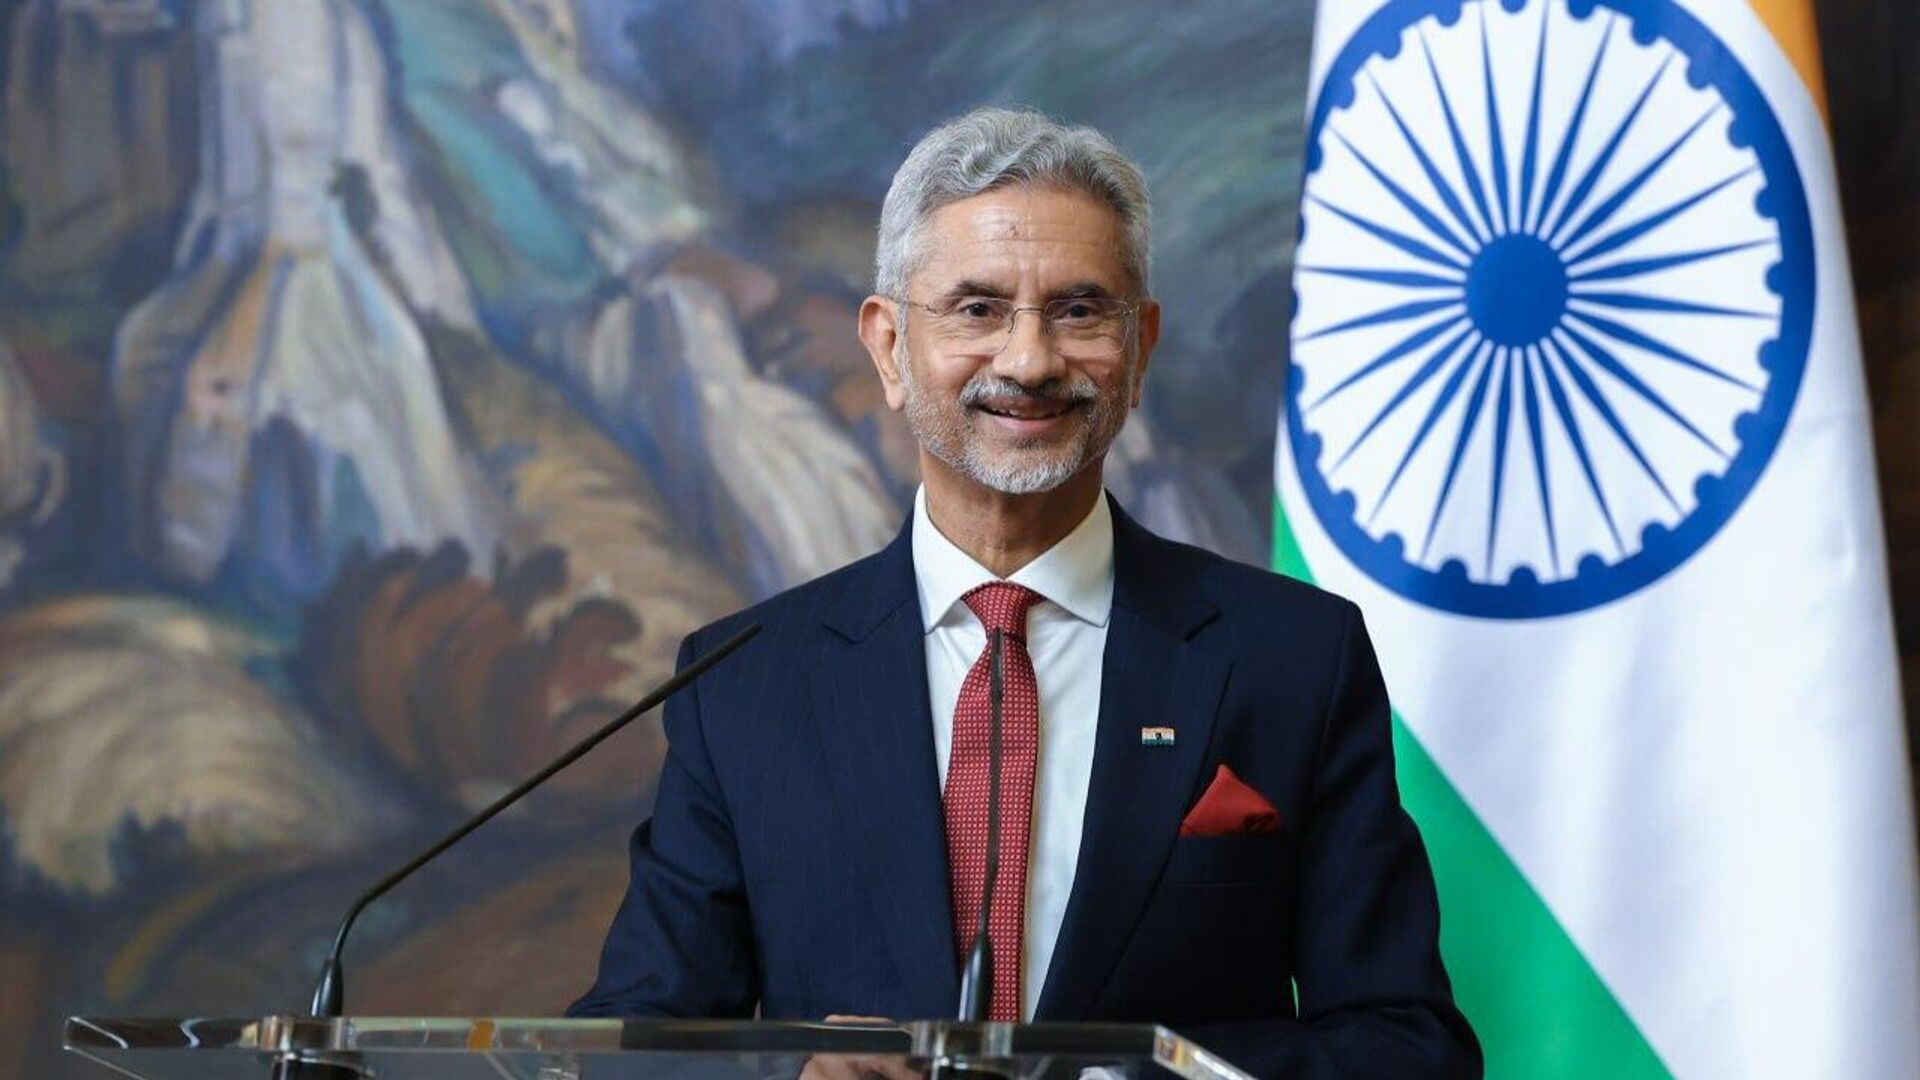 Jaishankar Dismisses Biden’s remarks, says, ‘India Not Xenophobic, But Very Open And Welcoming’